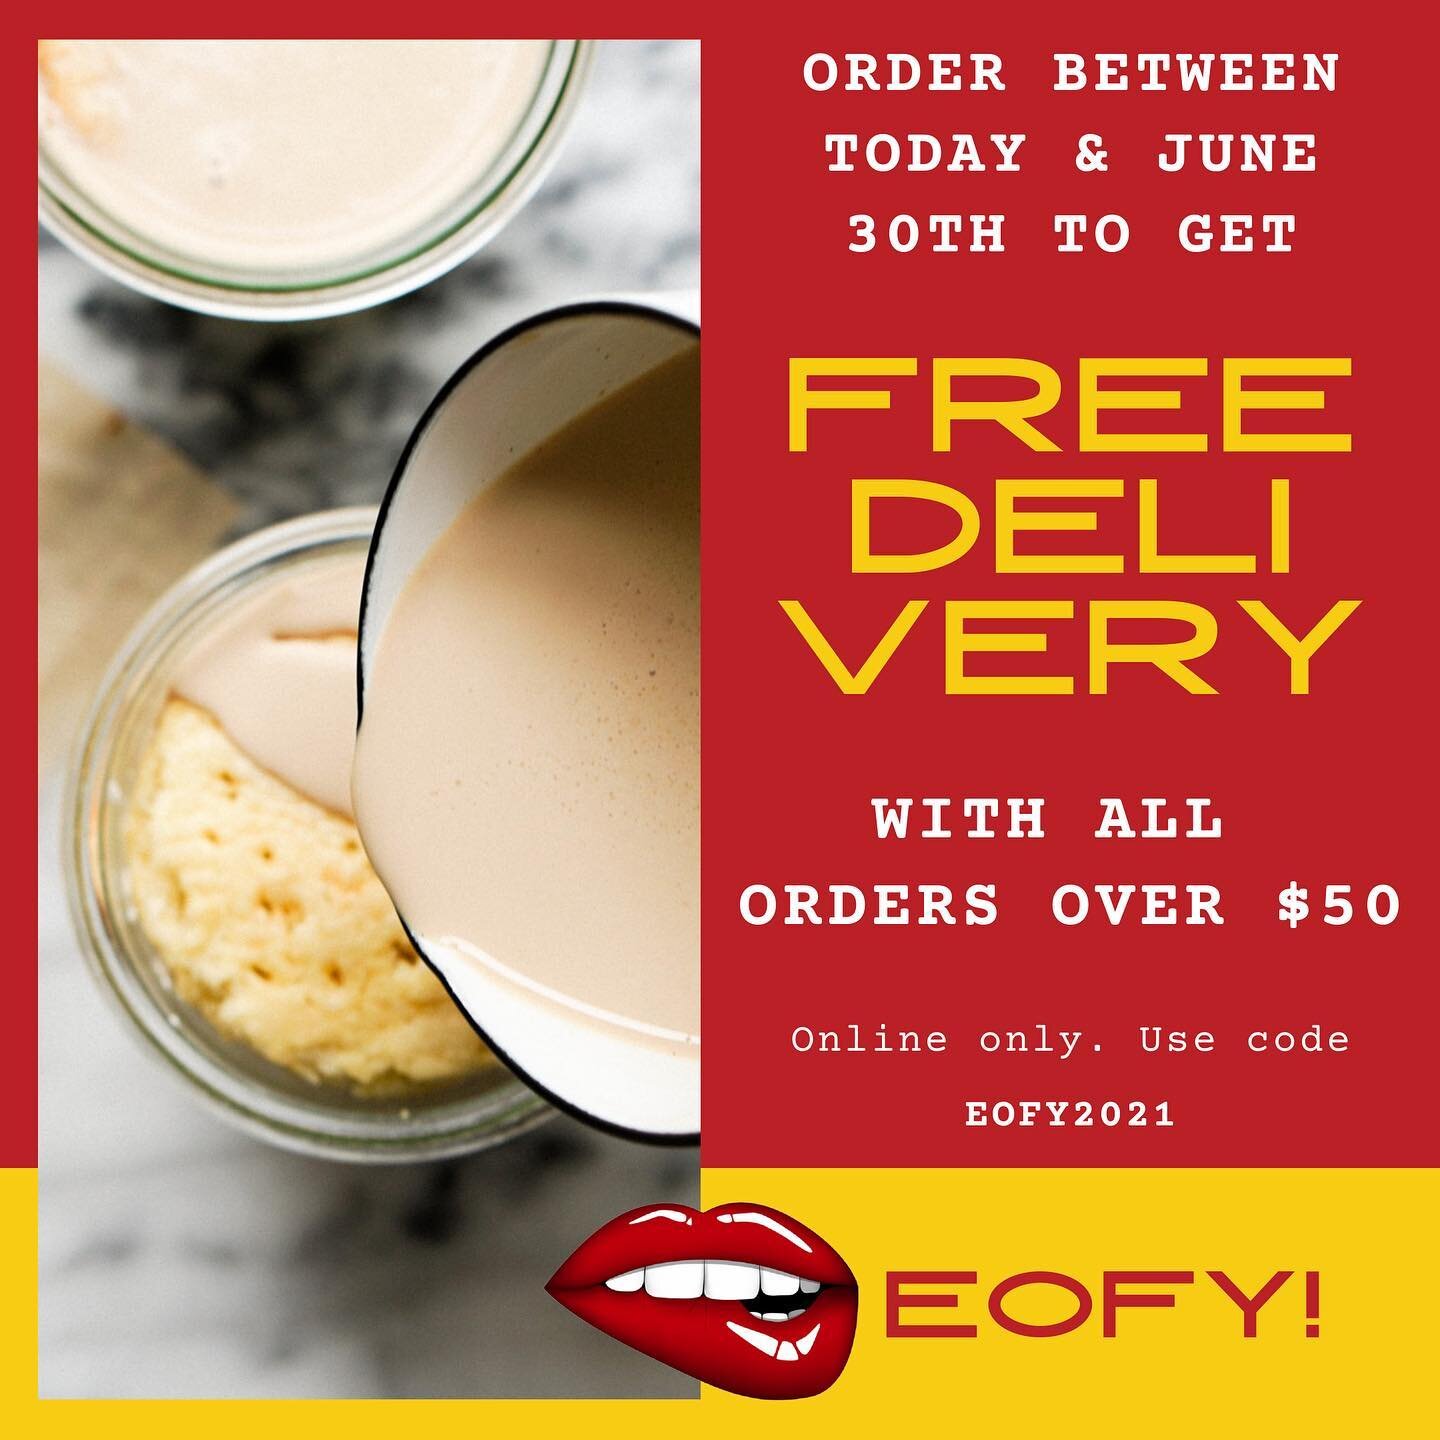 😱 Our EOFY promo is now on 🤩 Get FREE DELIVERY with all orders over $50 placed between today and June 30th, to be delivered at your select date 📆 

Don&rsquo;t miss out!!! 🏃🏾&zwj;♂️ 🏃 🏃🏻&zwj;♀️ 

👄http://pokedcakes.com 

Order before 3:00 pm